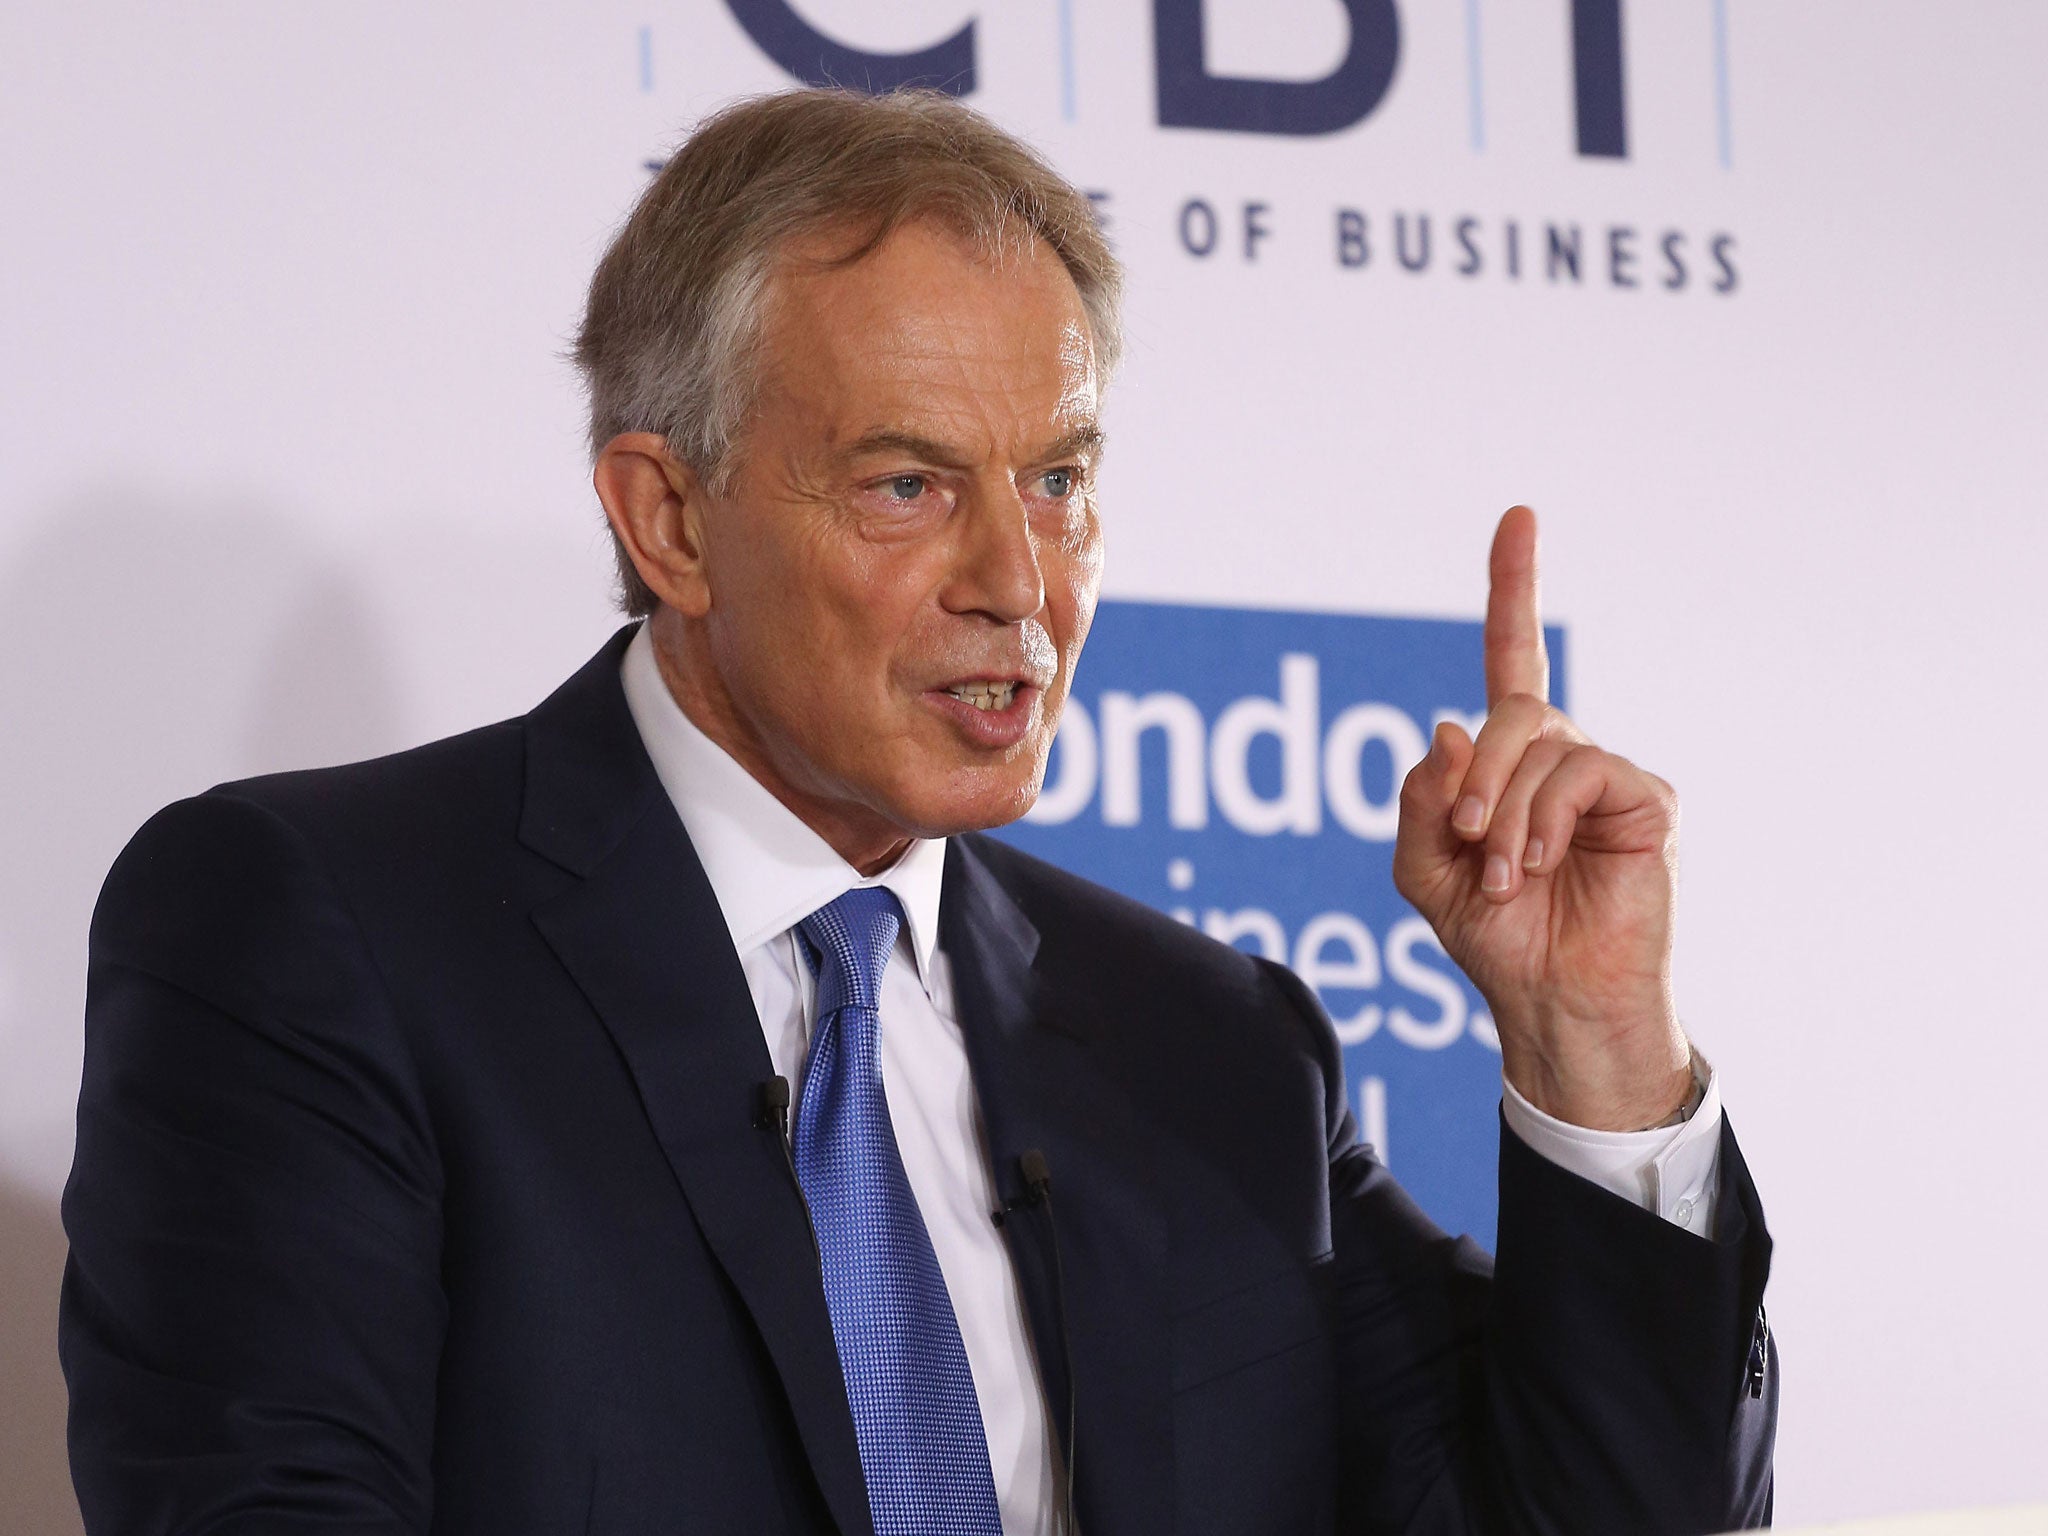 Tony Blair delivers a speech about Europe during a CBI event at the London Business School in central London